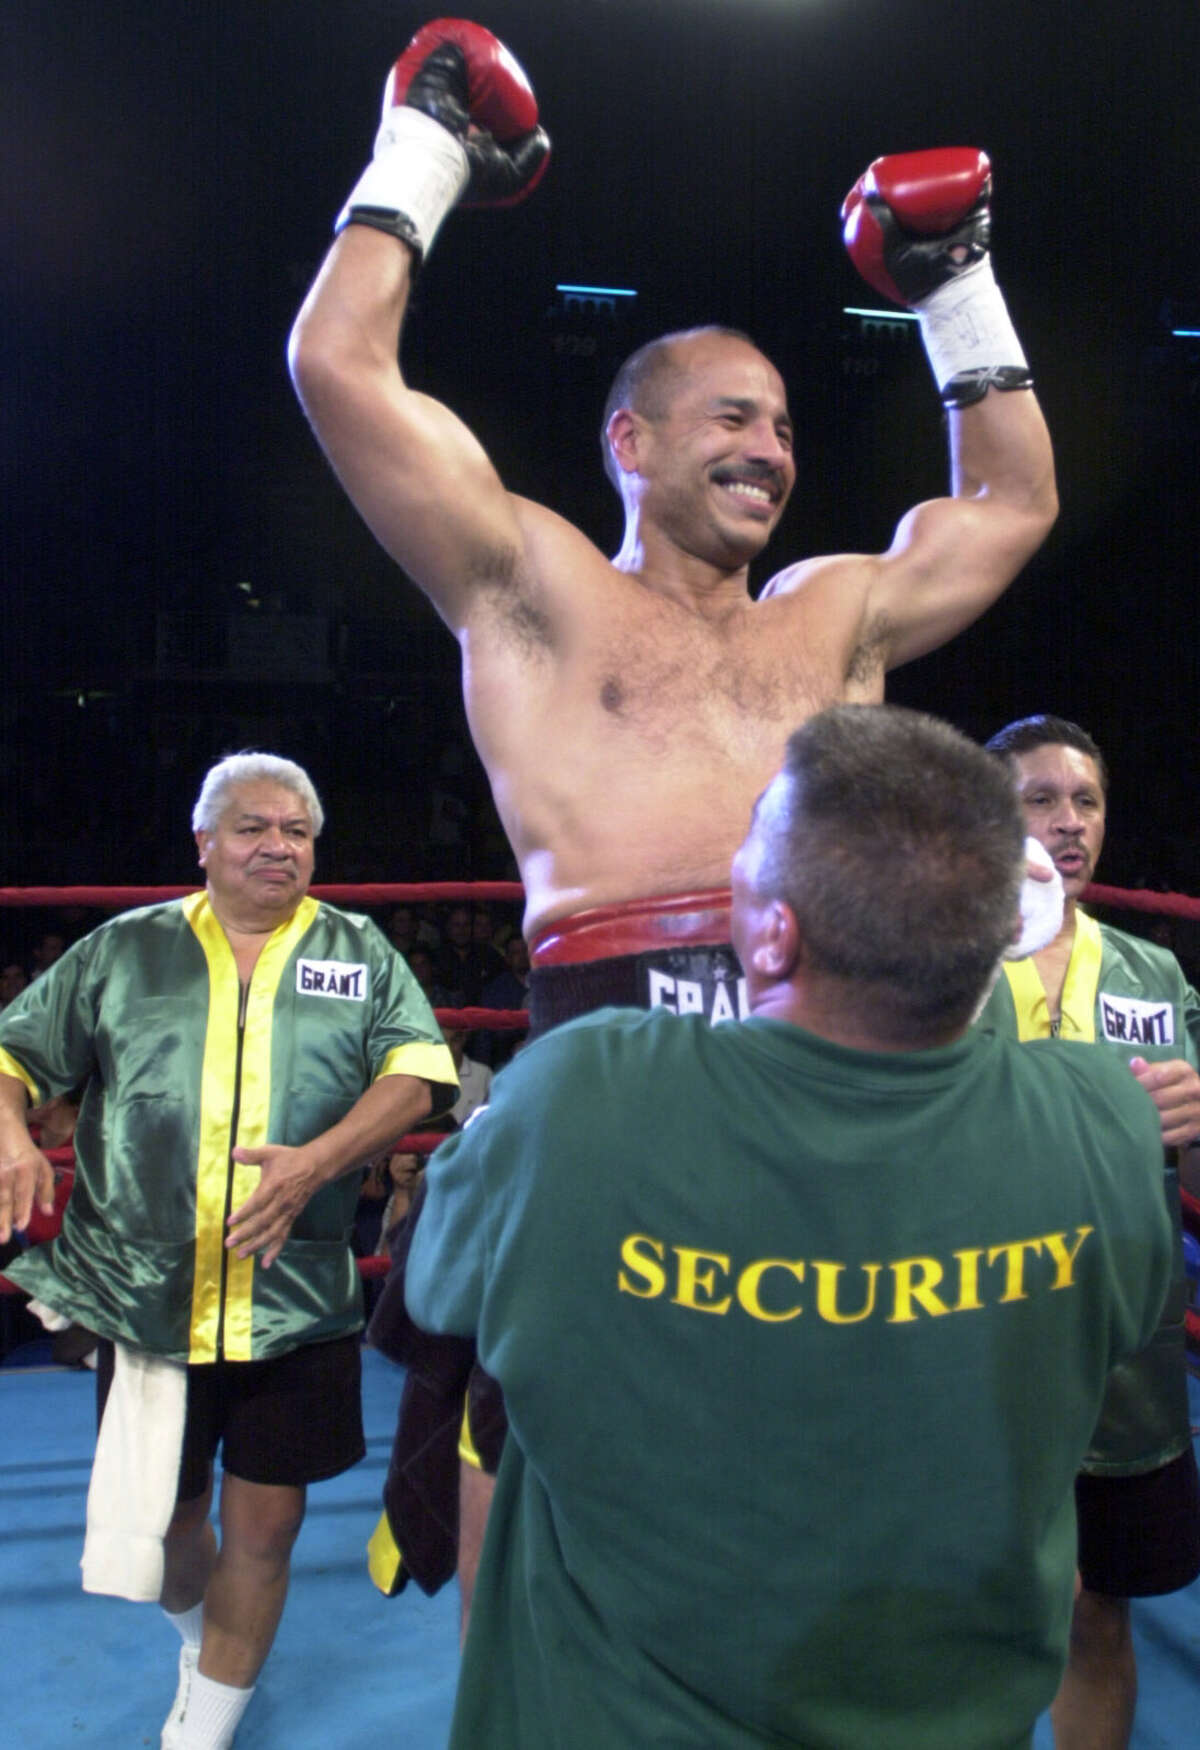 Tony Ayala Sr. (left) trained several world champs, but he was best known for training his four sons. Here, he celebrates Tony Jr.'s victory in his last fight April 15, 2000.